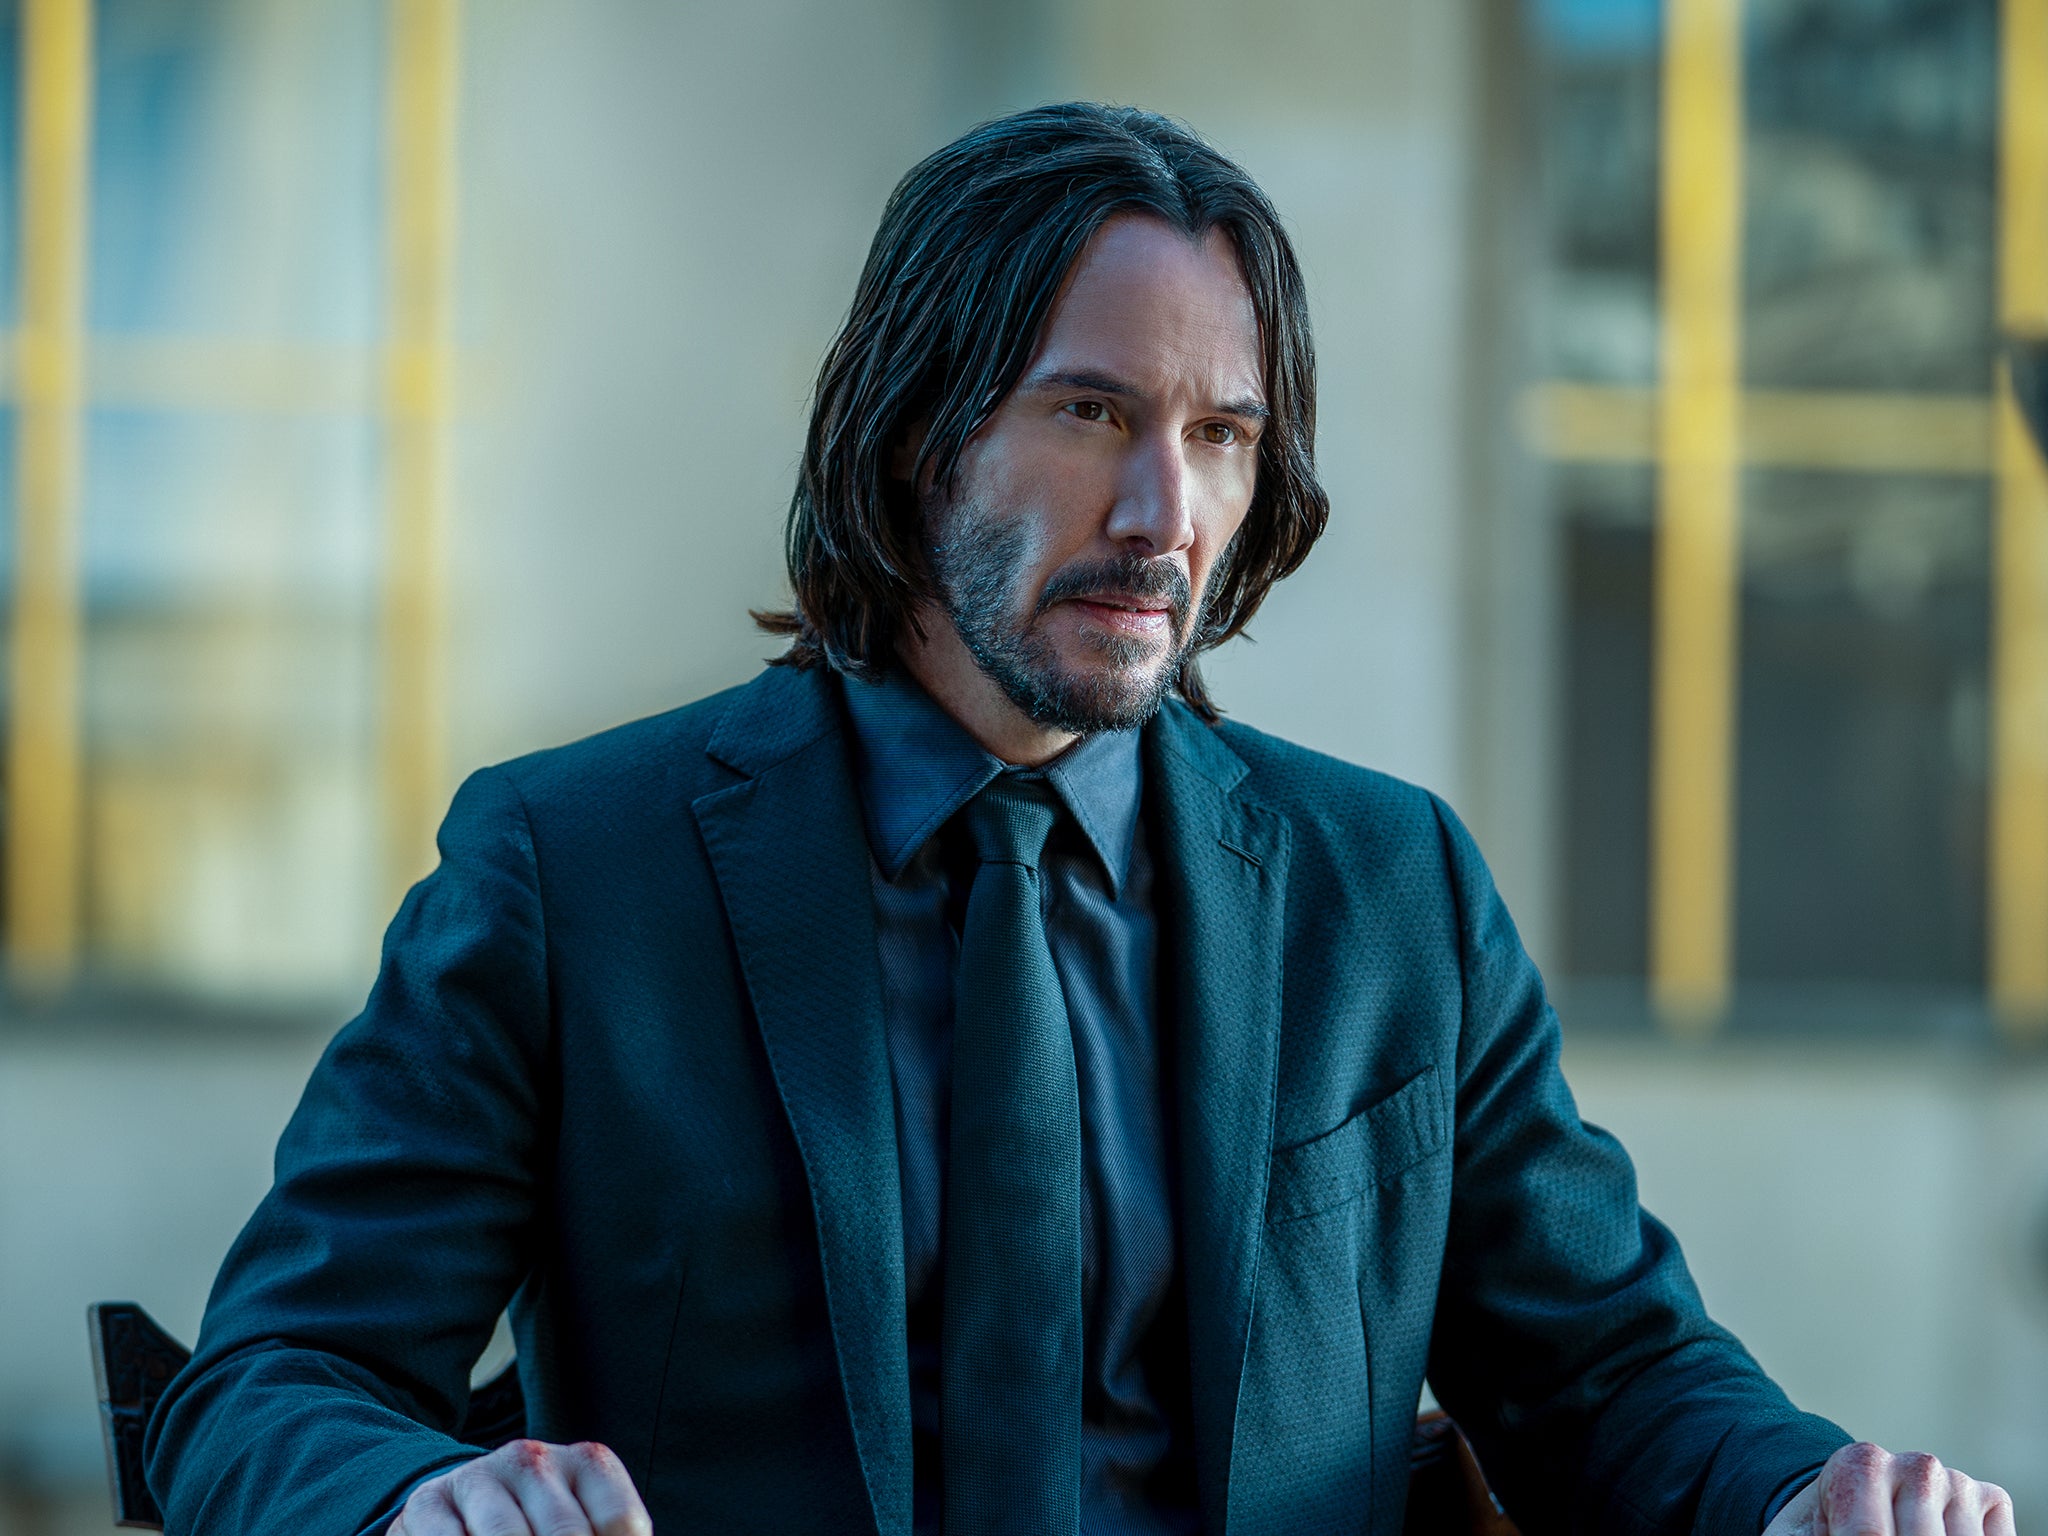 How to Watch John Wick: Chapter 4 (As A Christian)